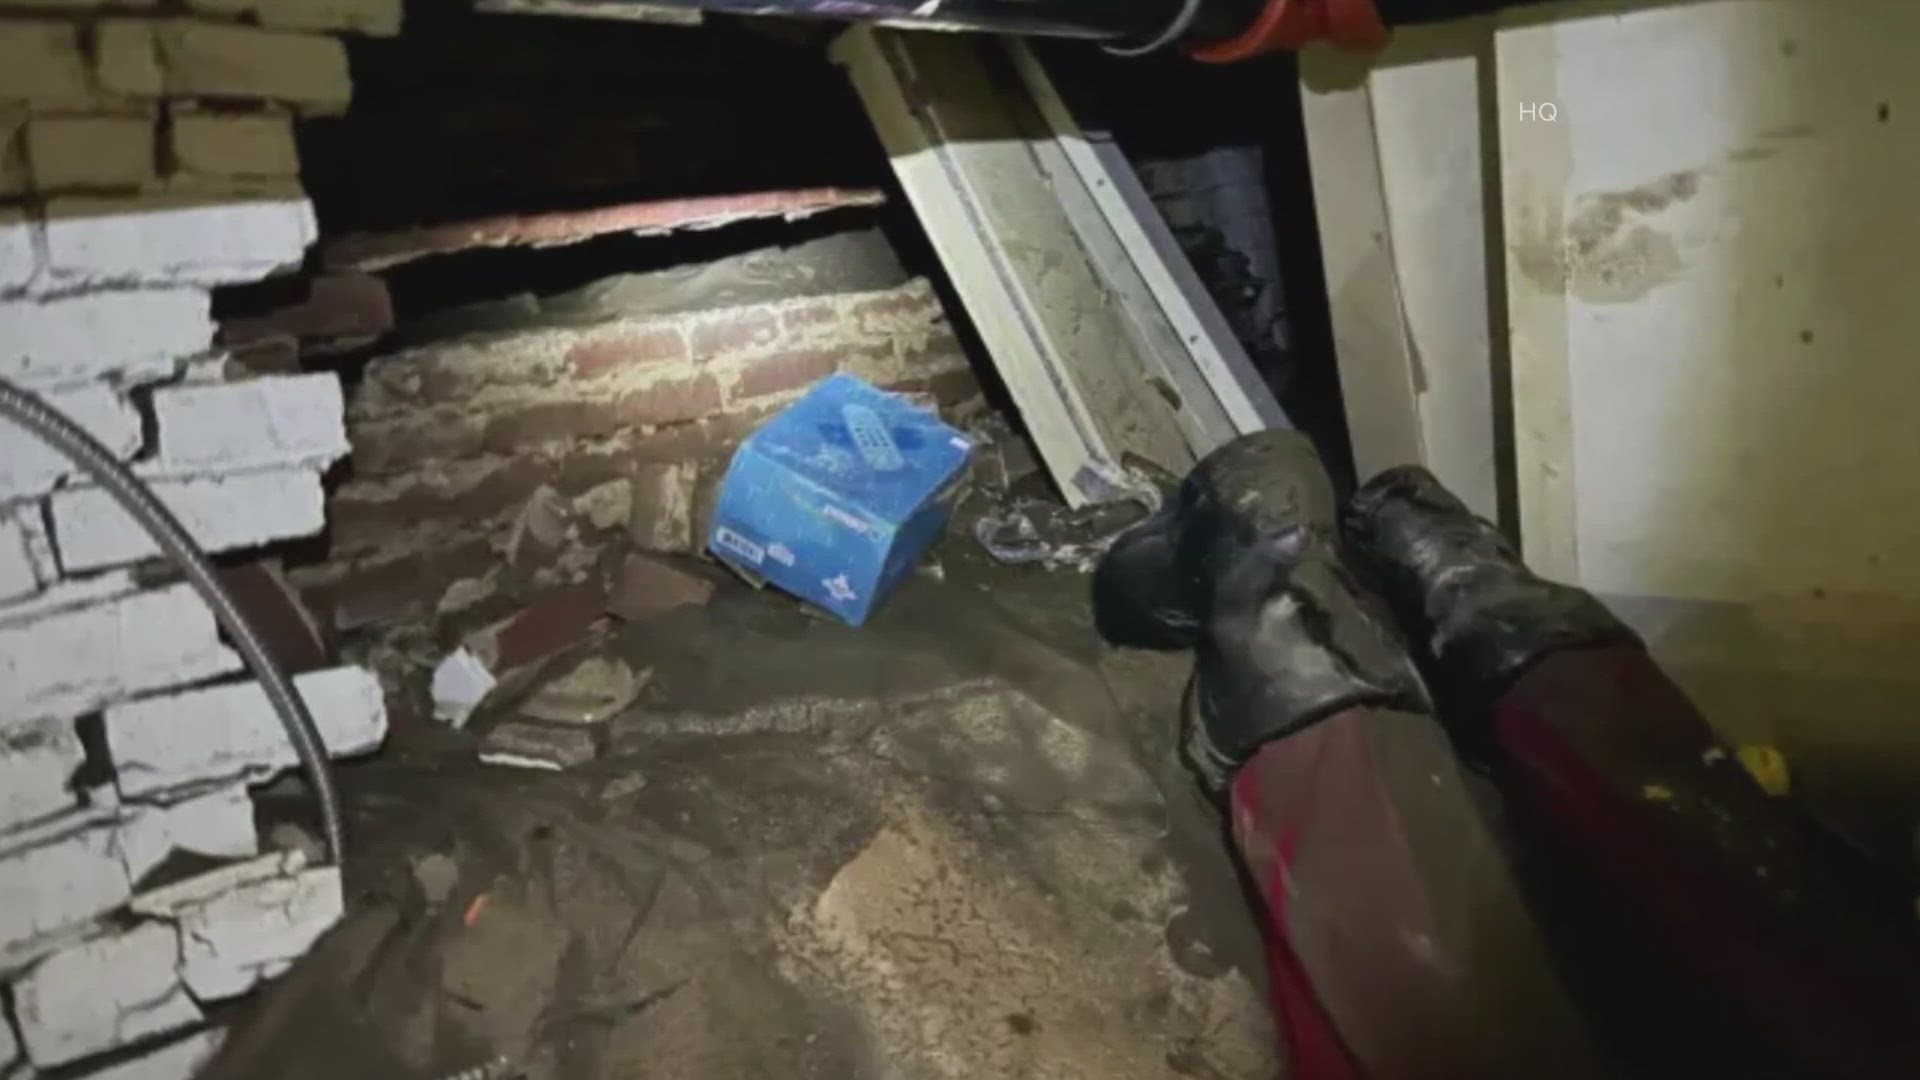 The music venue was closed for months after a water line break caused major flooding.